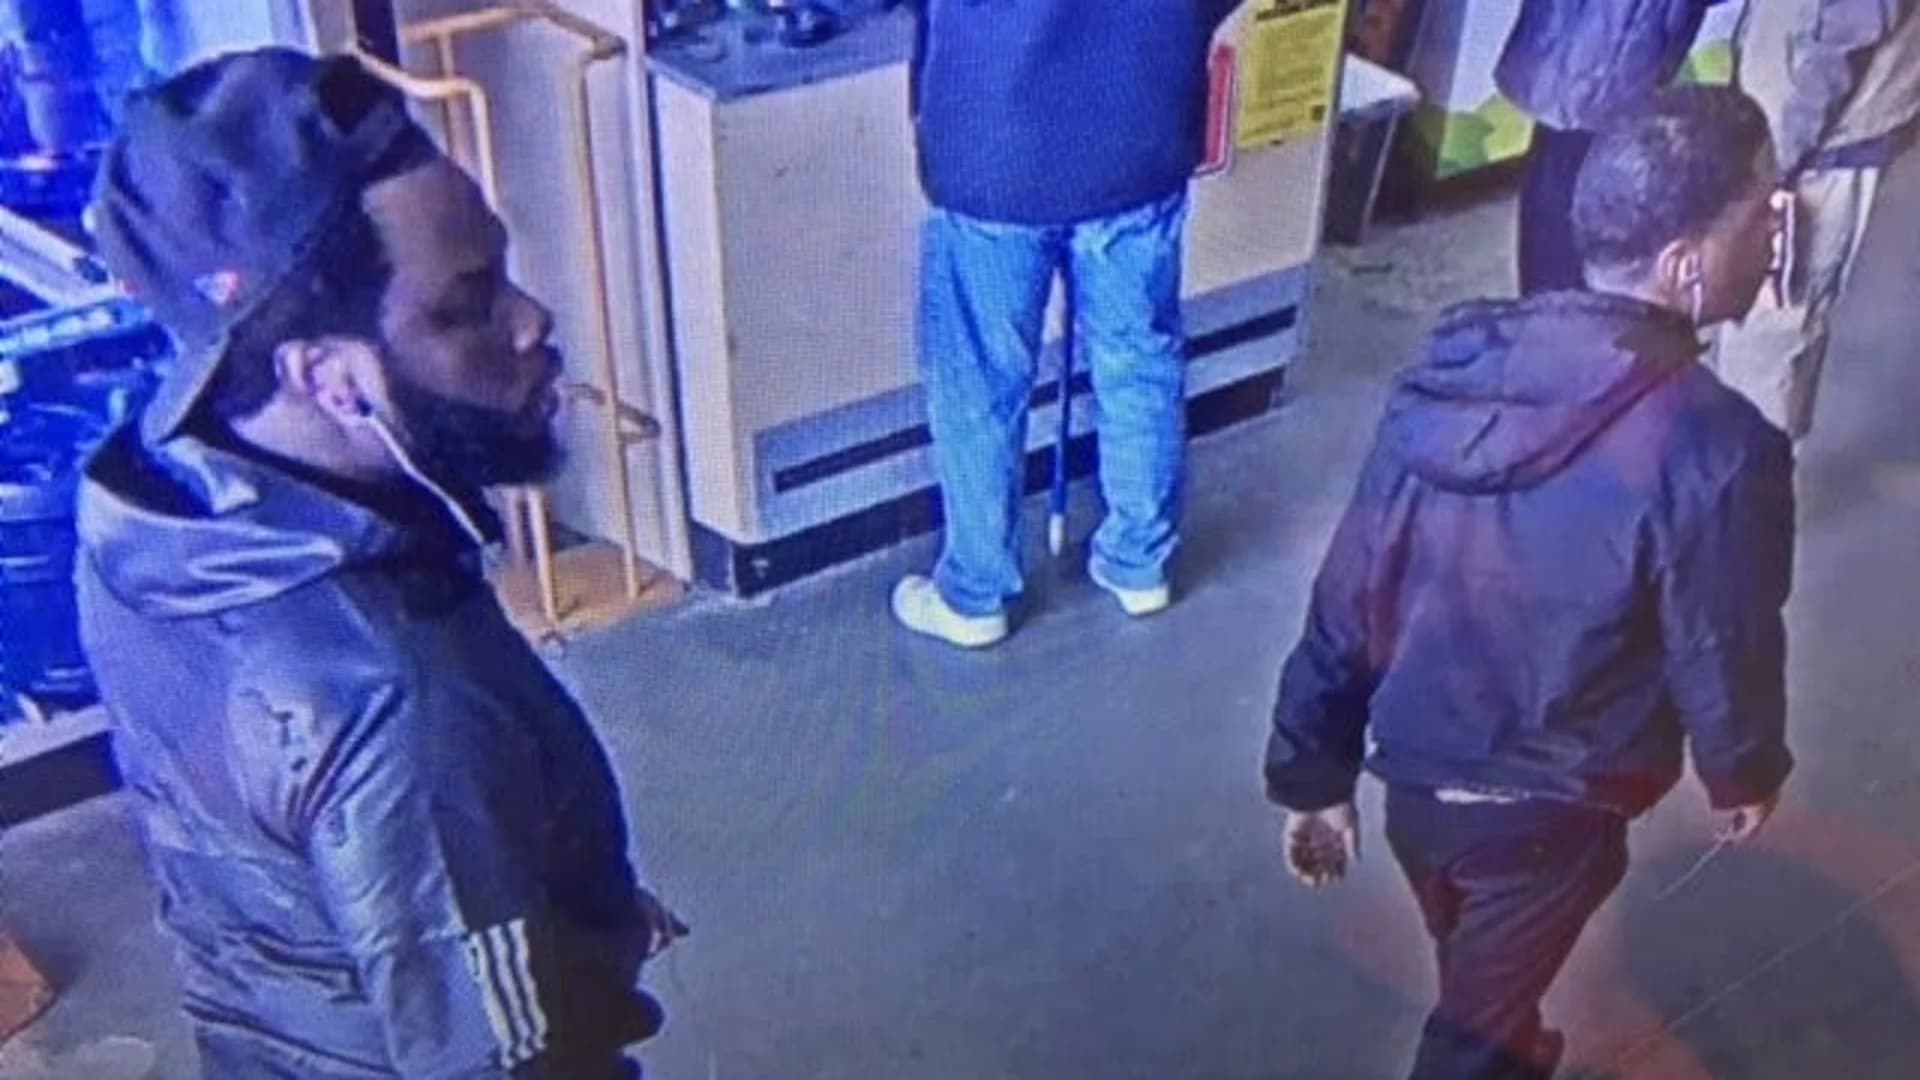 Surveillance images show 2 men accused of credit card fraud in Fairfield